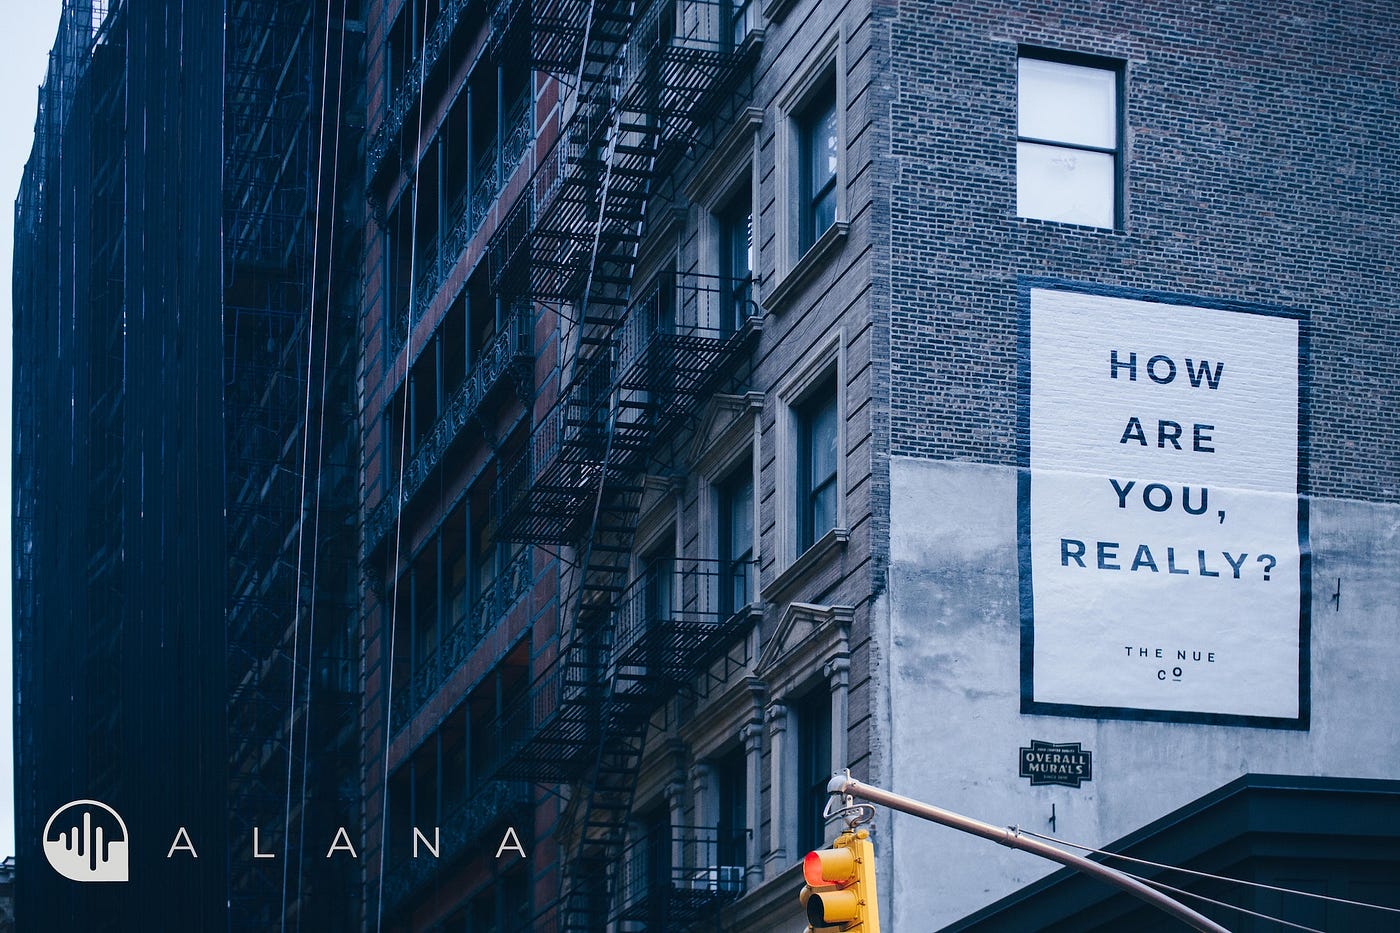 A poster on the side of a large building saying “How are you really?”